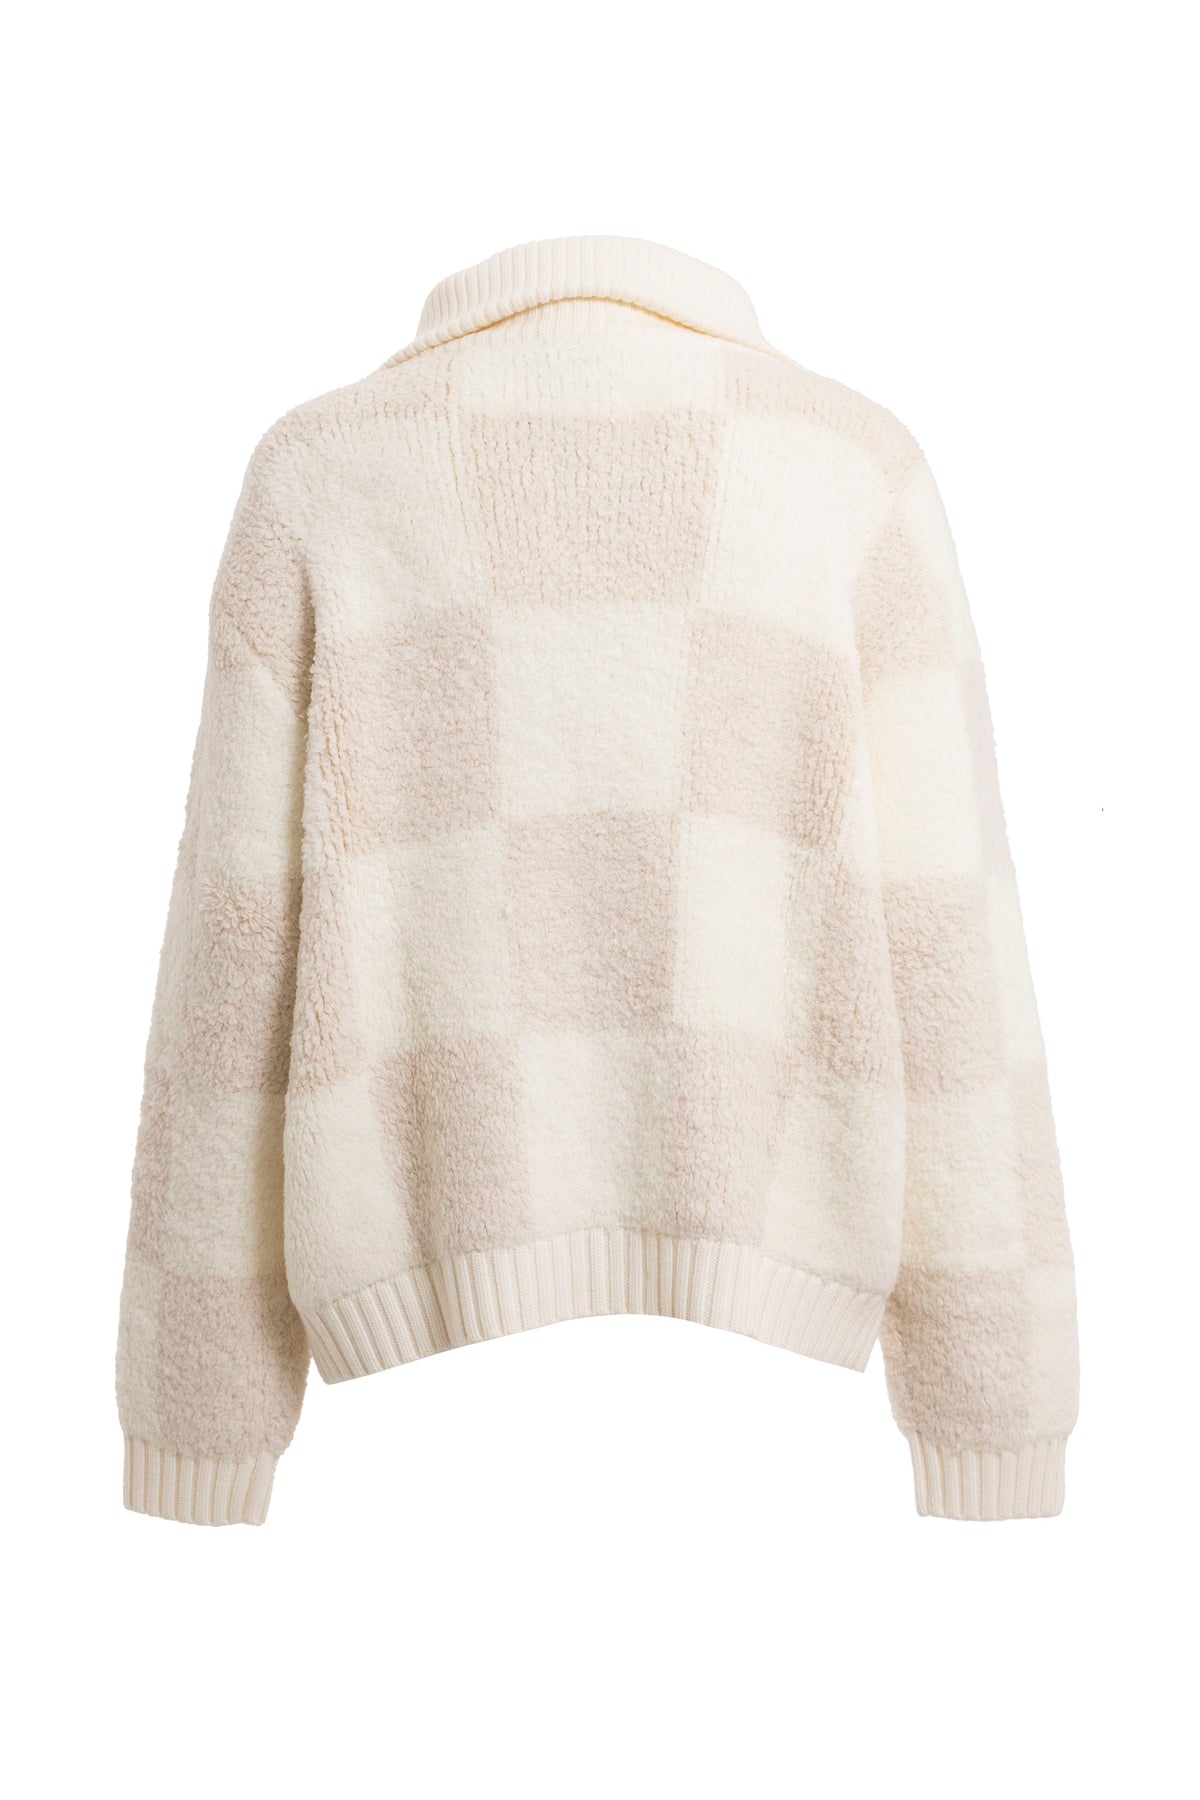 CHECKED BOUCLE CARDIGAN / WHT BEI